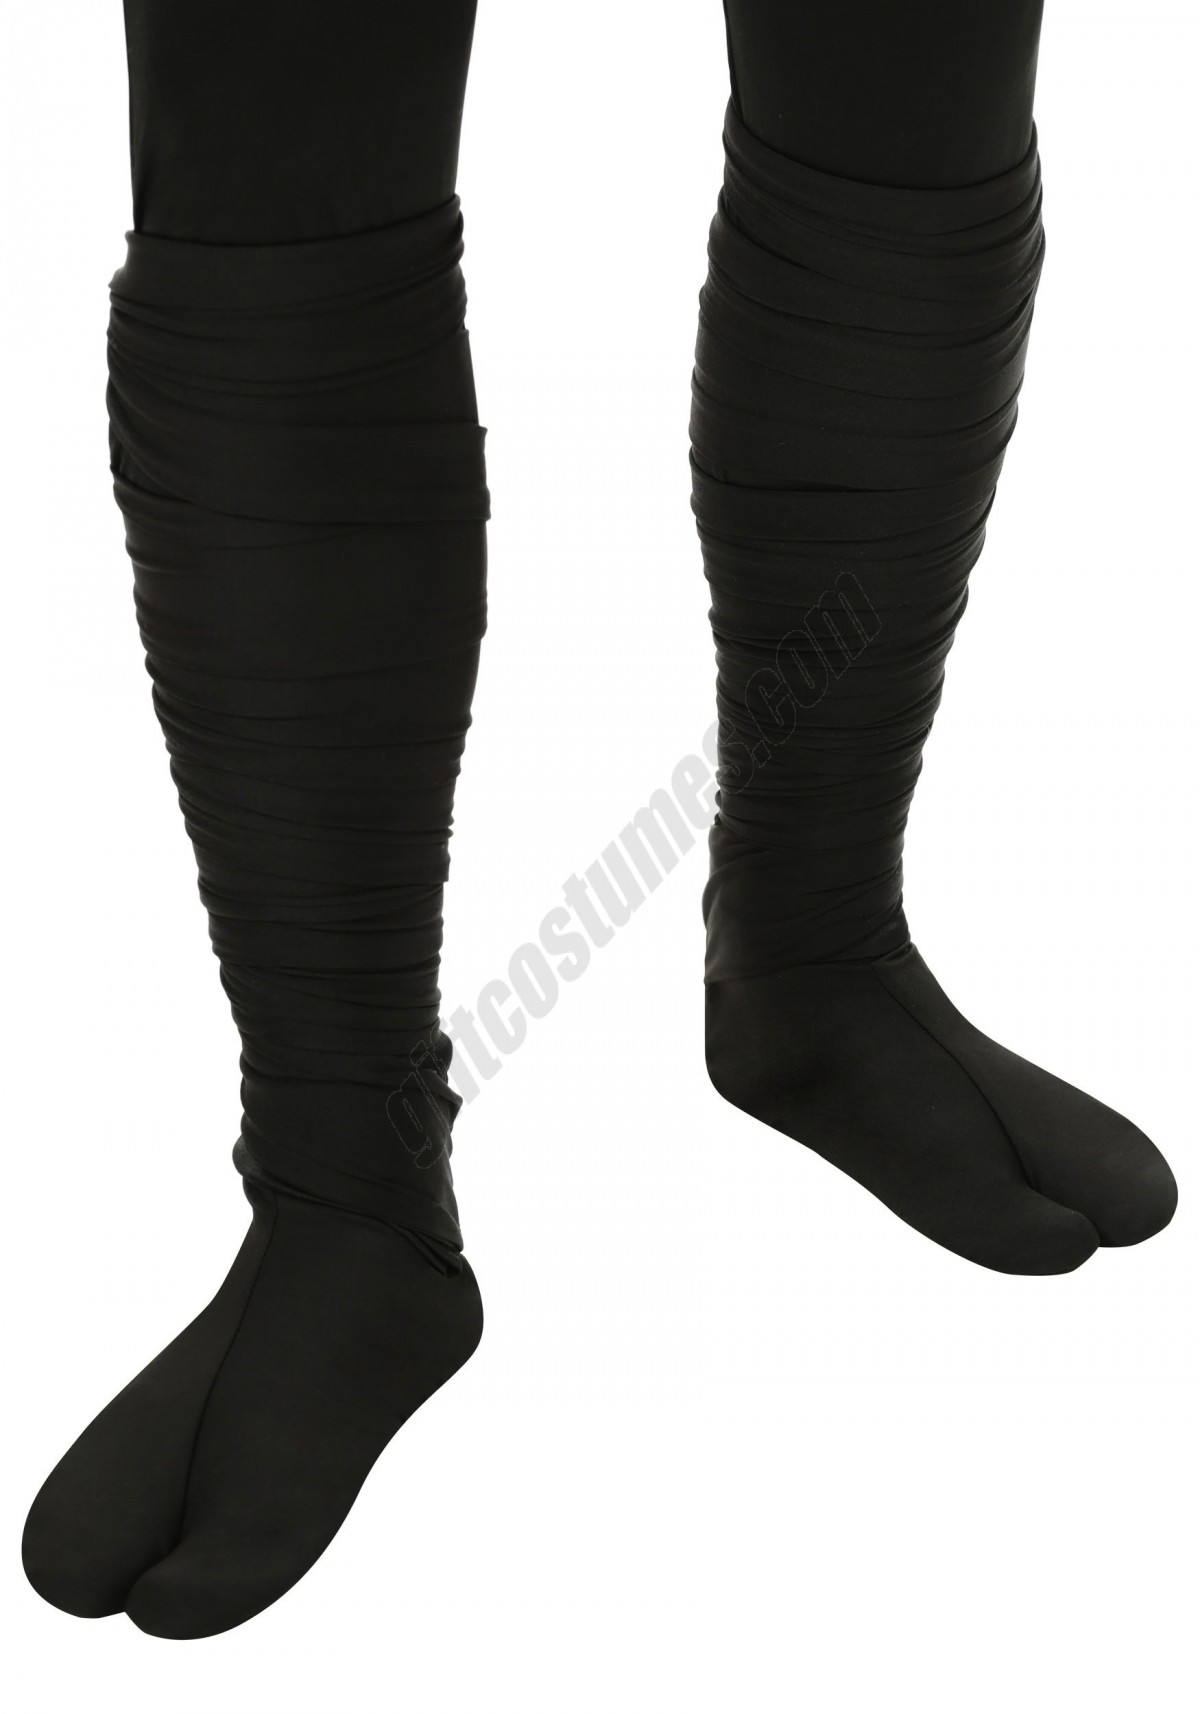 Ninja Costume Boots for Adults Promotions - -0